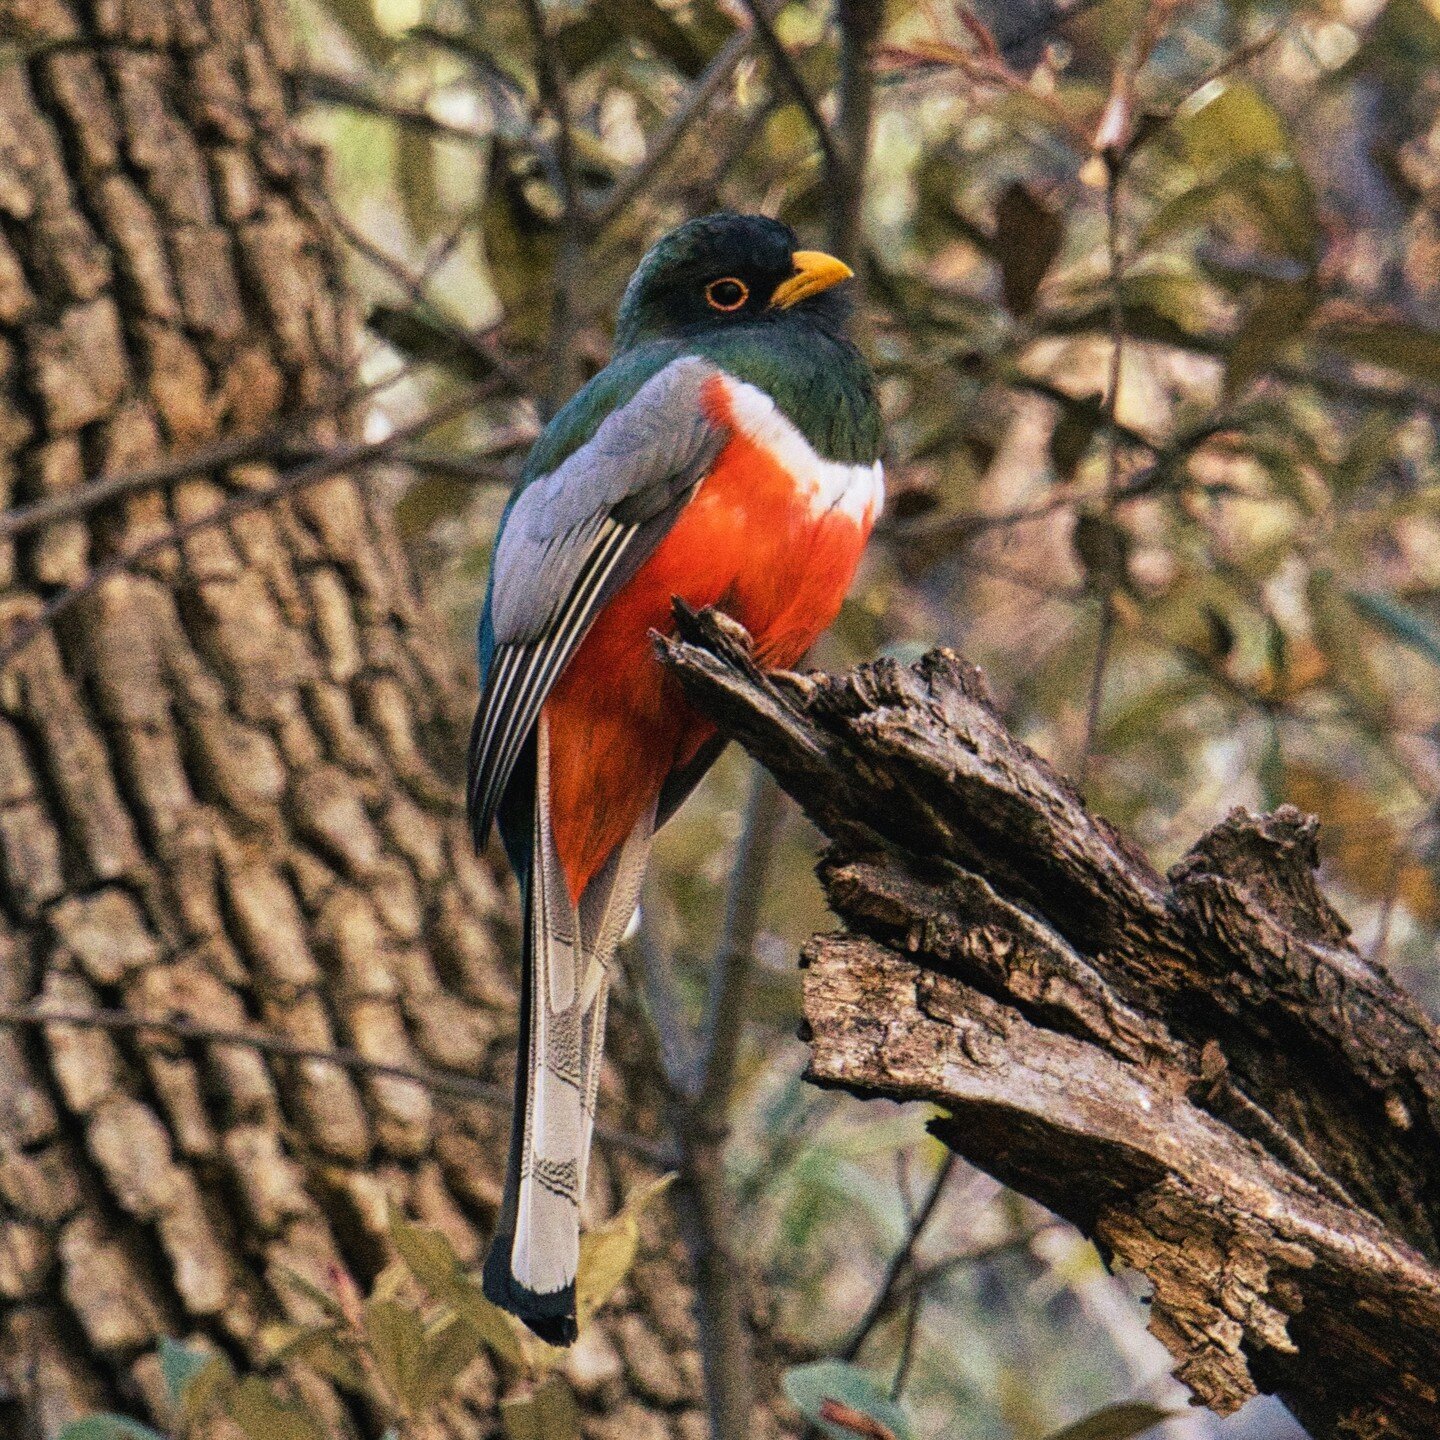 The amazing Elegant Trogon was seen in the Cave Creek area - Chiricahua Mtns (Arizona). We were able to spend 1.5 hours within sight of this colorful bird. #eleganttrogon #birdsofinstagram #birdphotography #bird #birds #chiricahuamountains #cavecreek